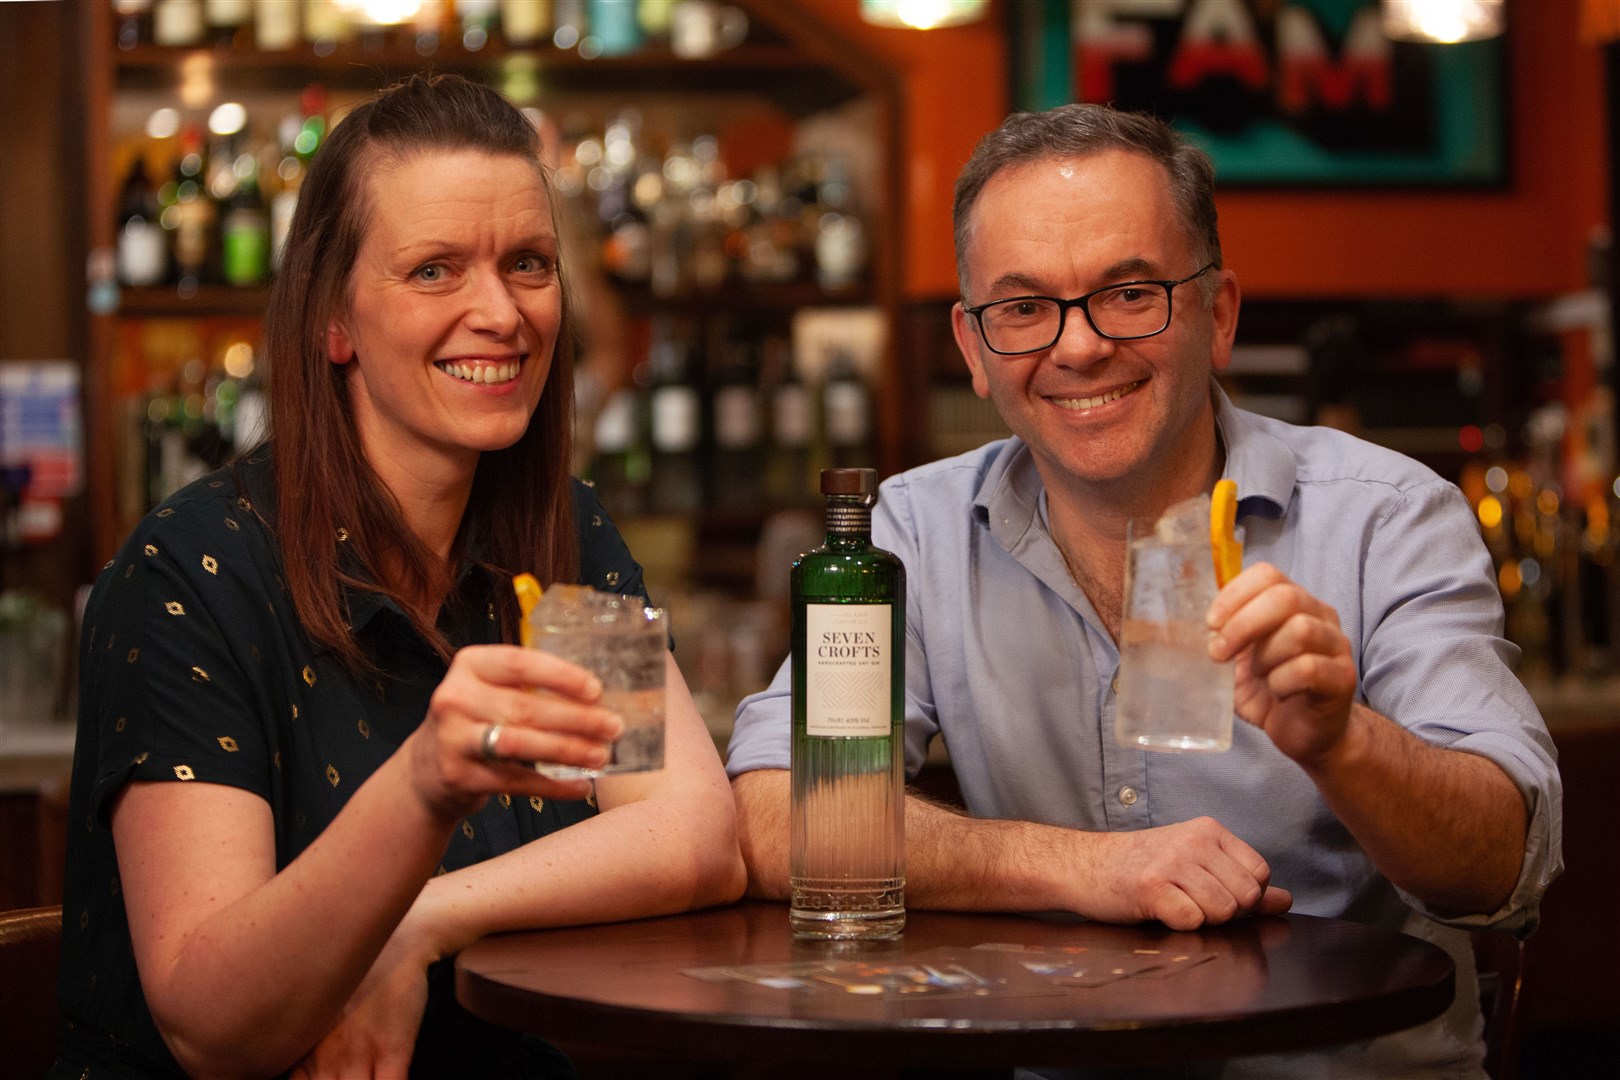 Helen Chalmers and Robert Hicks, Founders of Highland Liquor Company and Seven Crofts Gin